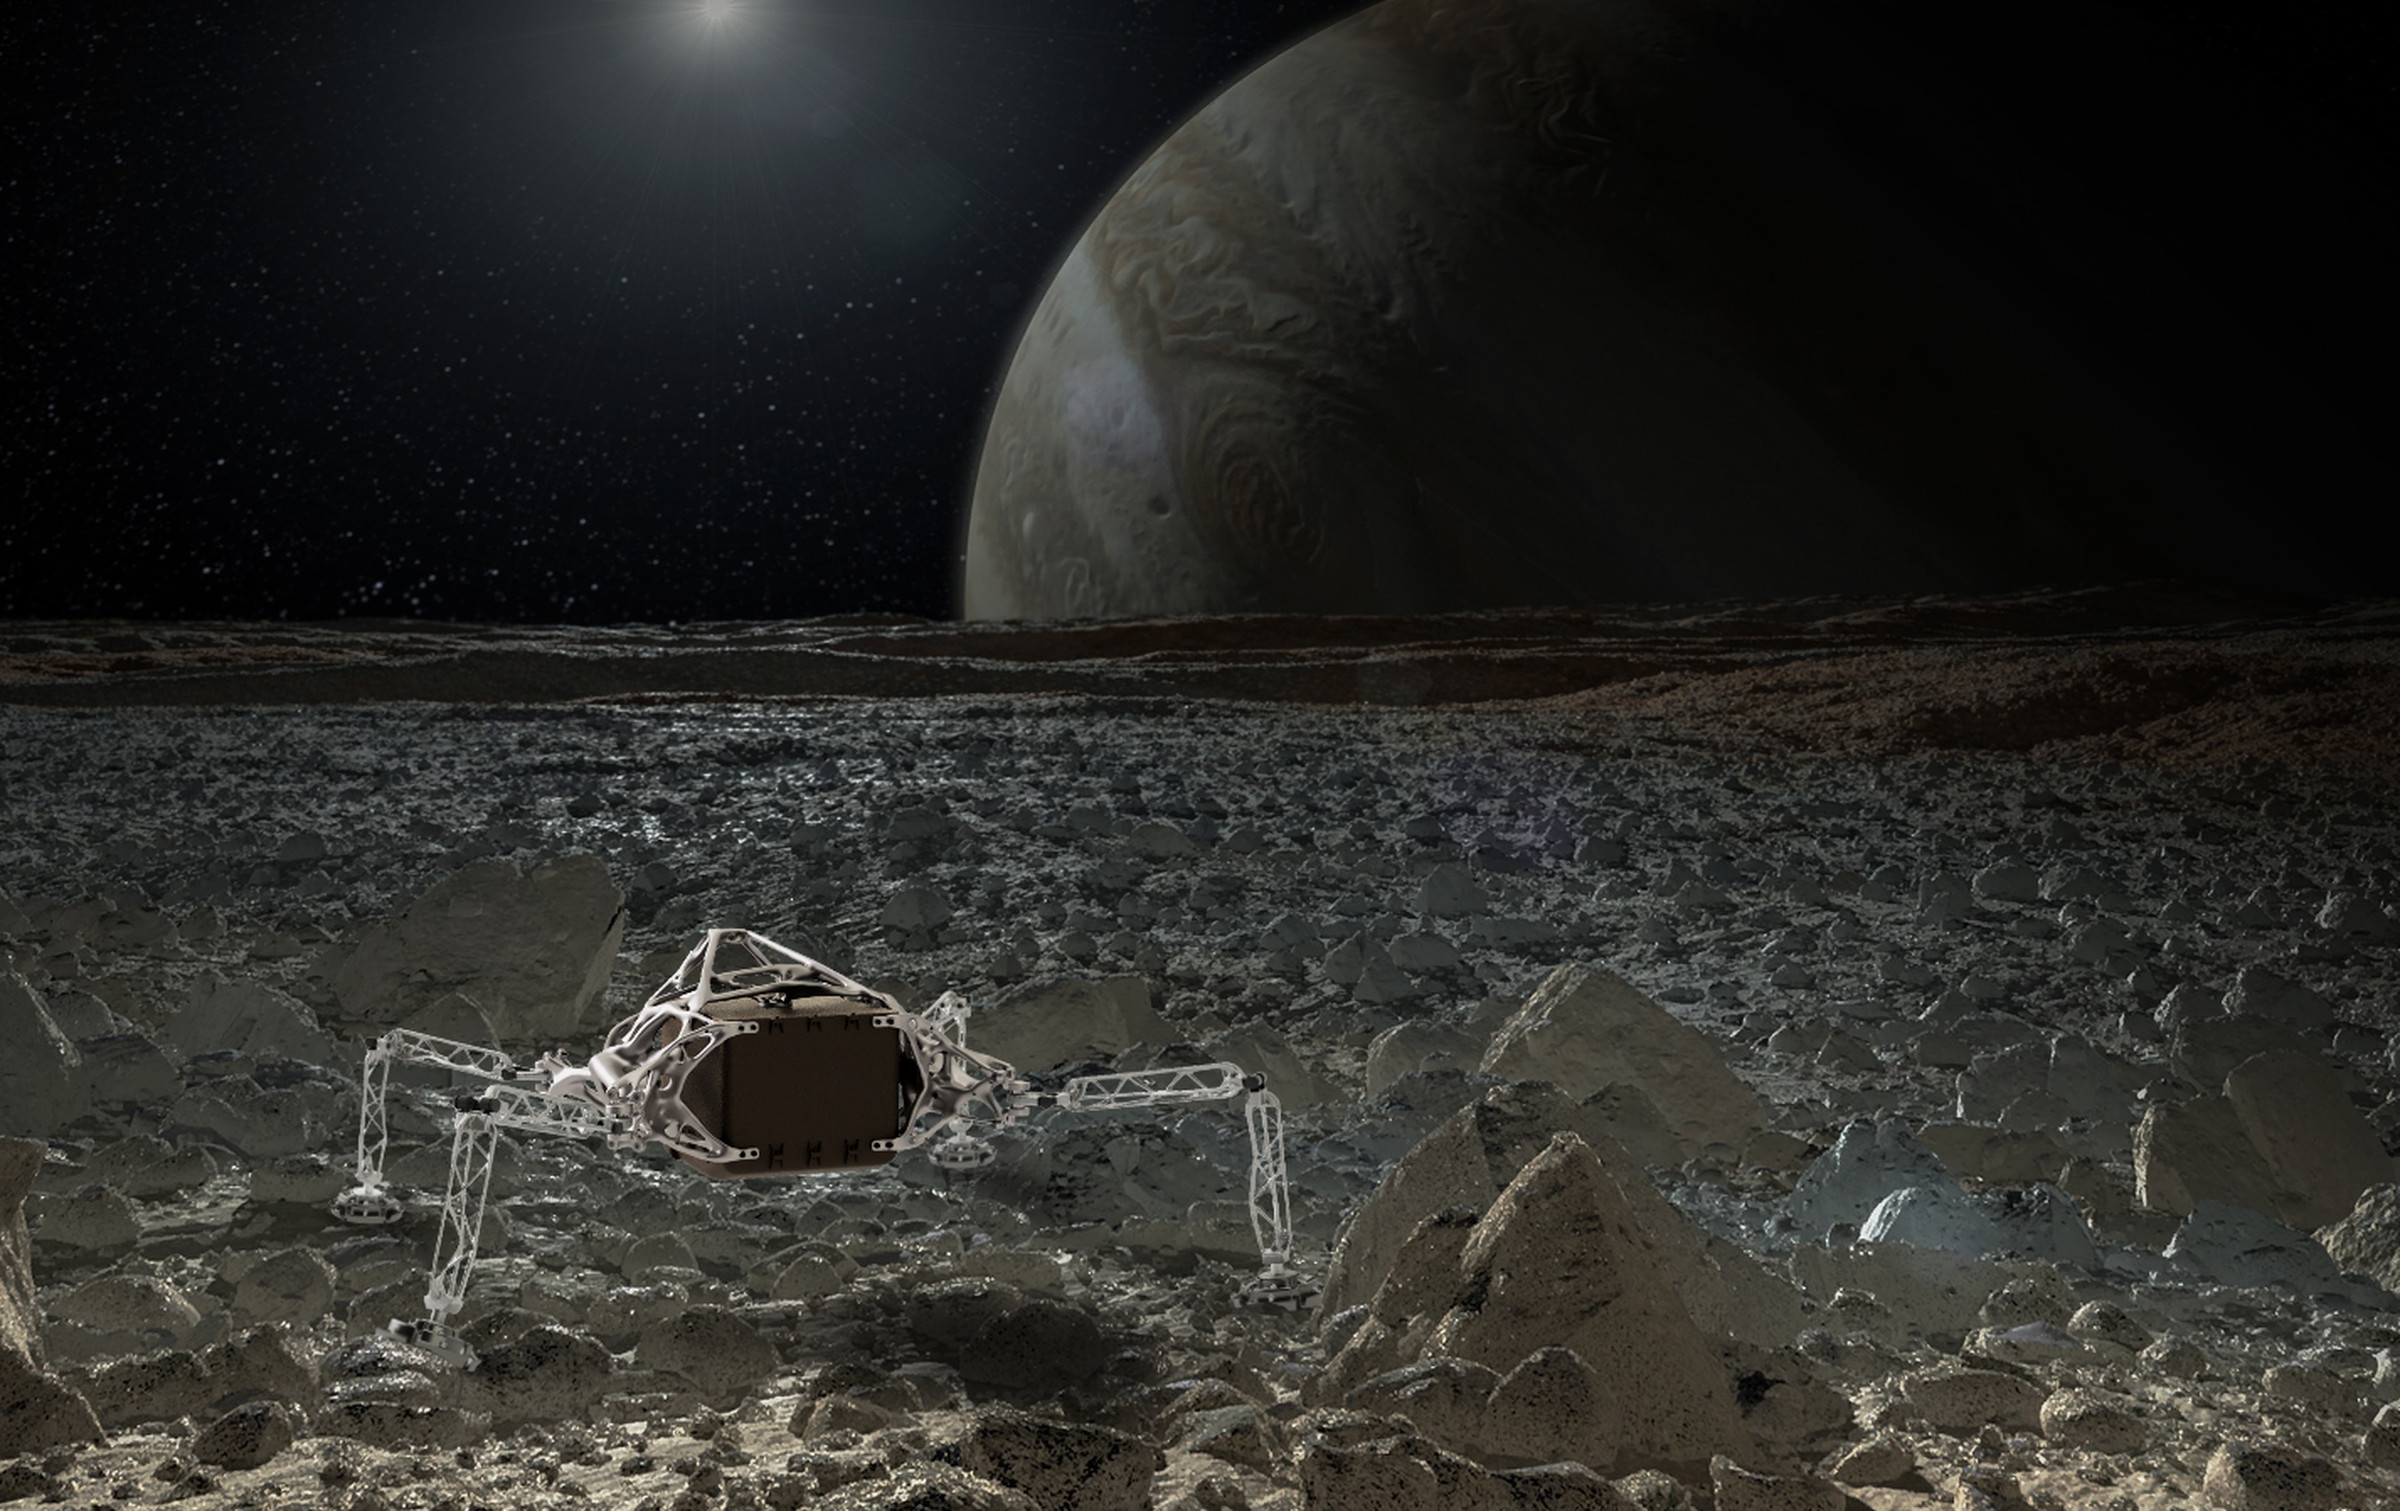 An artistic rendering of the JPL / Autodesk lander on the surface of Europa